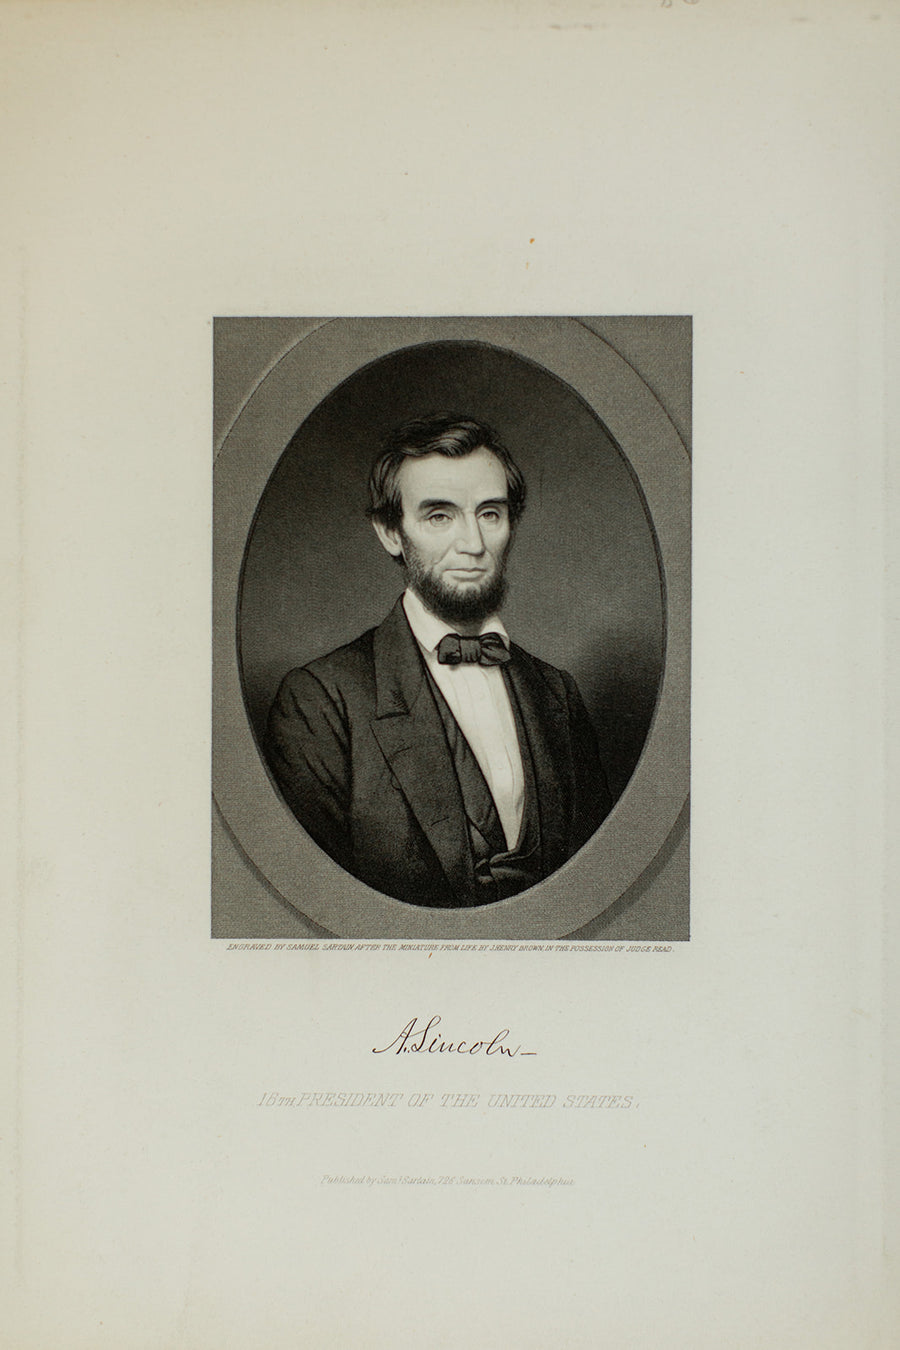 A. Lincoln Engraving